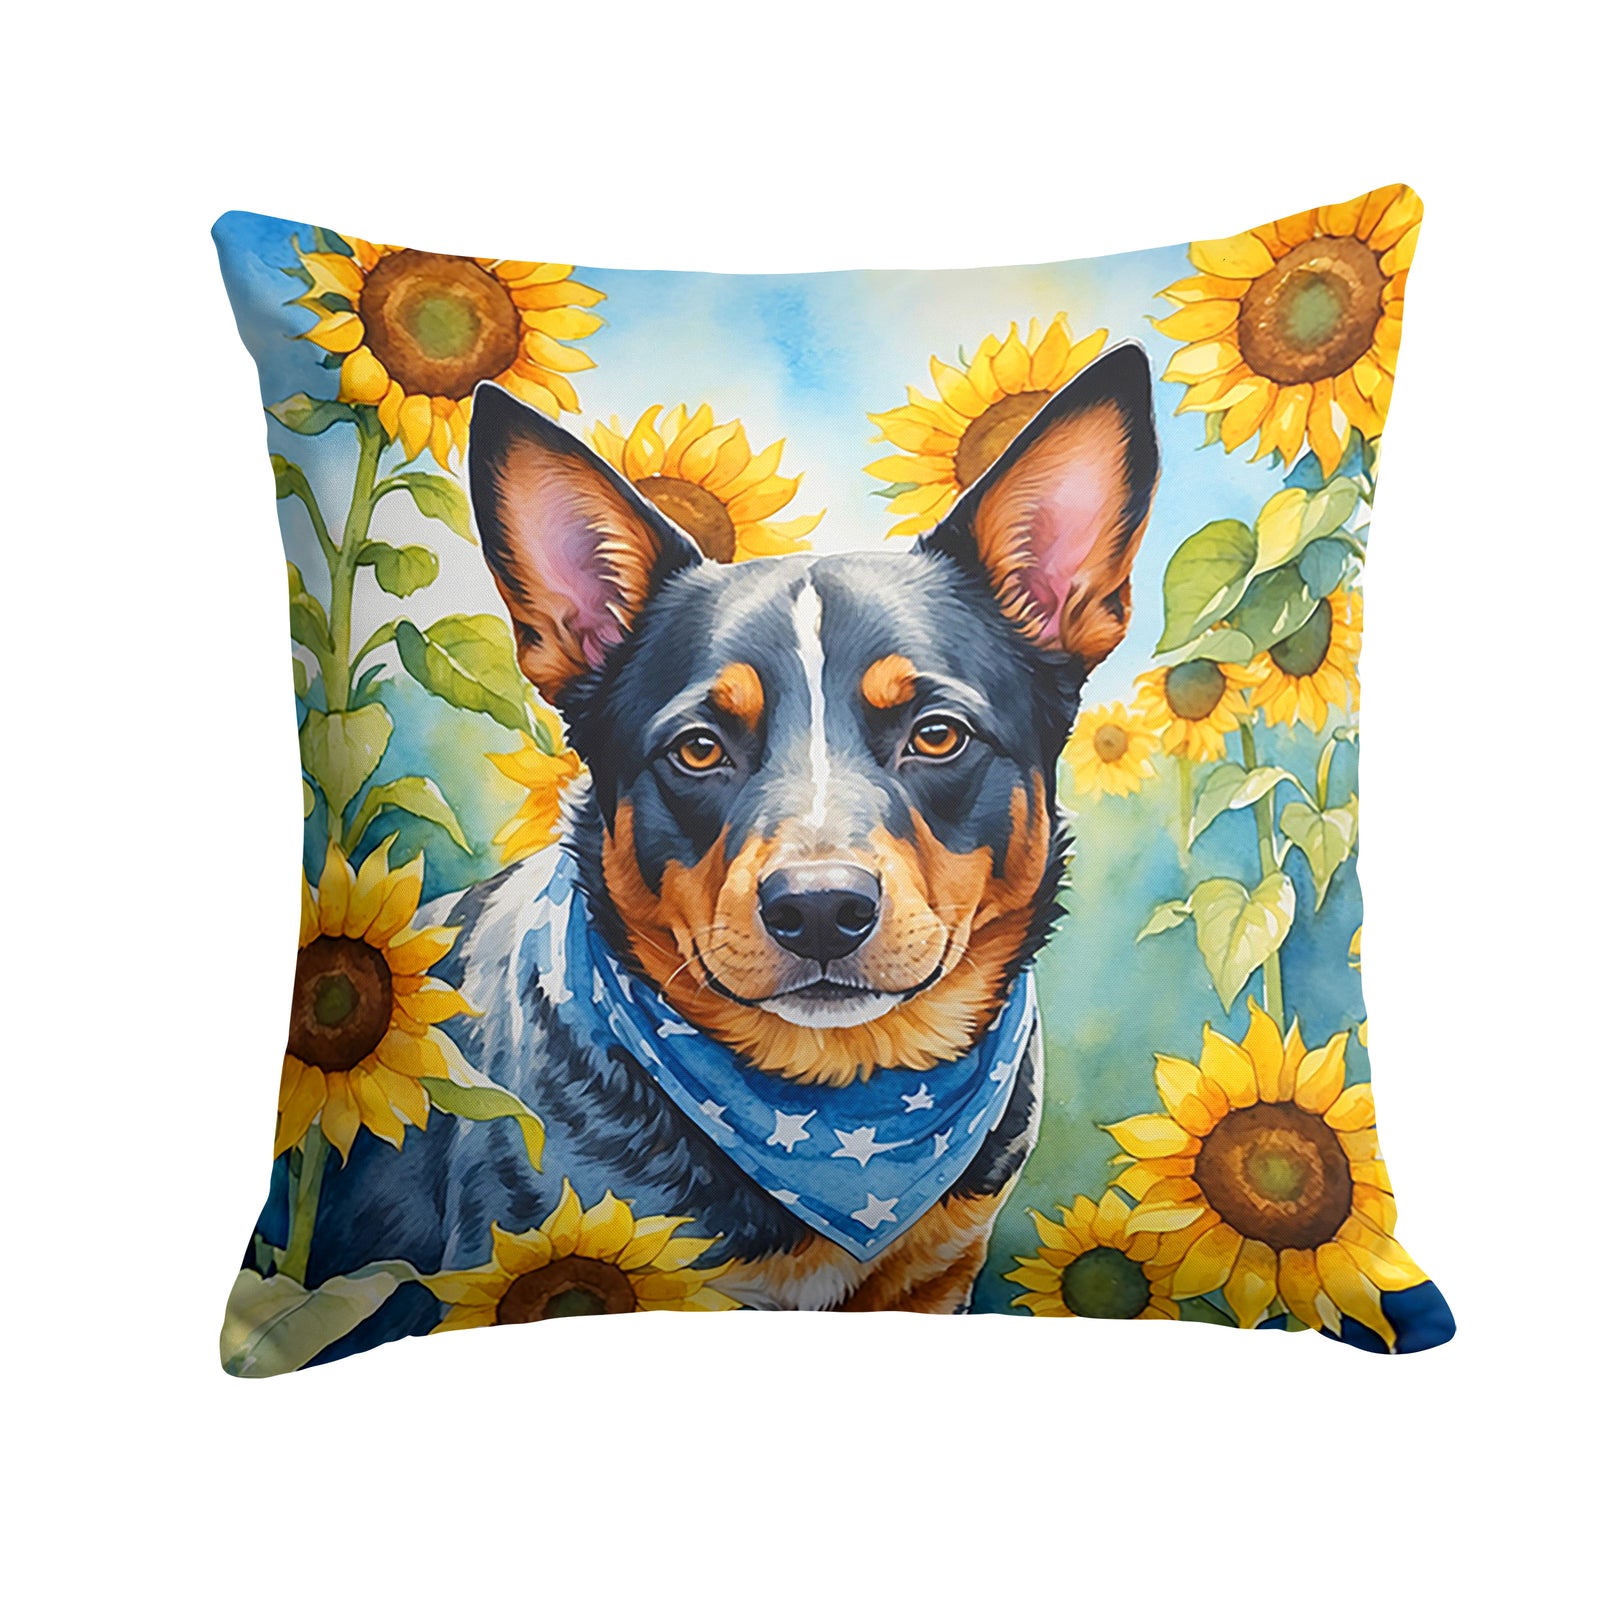 Buy this Australian Cattle Dog in Sunflowers Throw Pillow